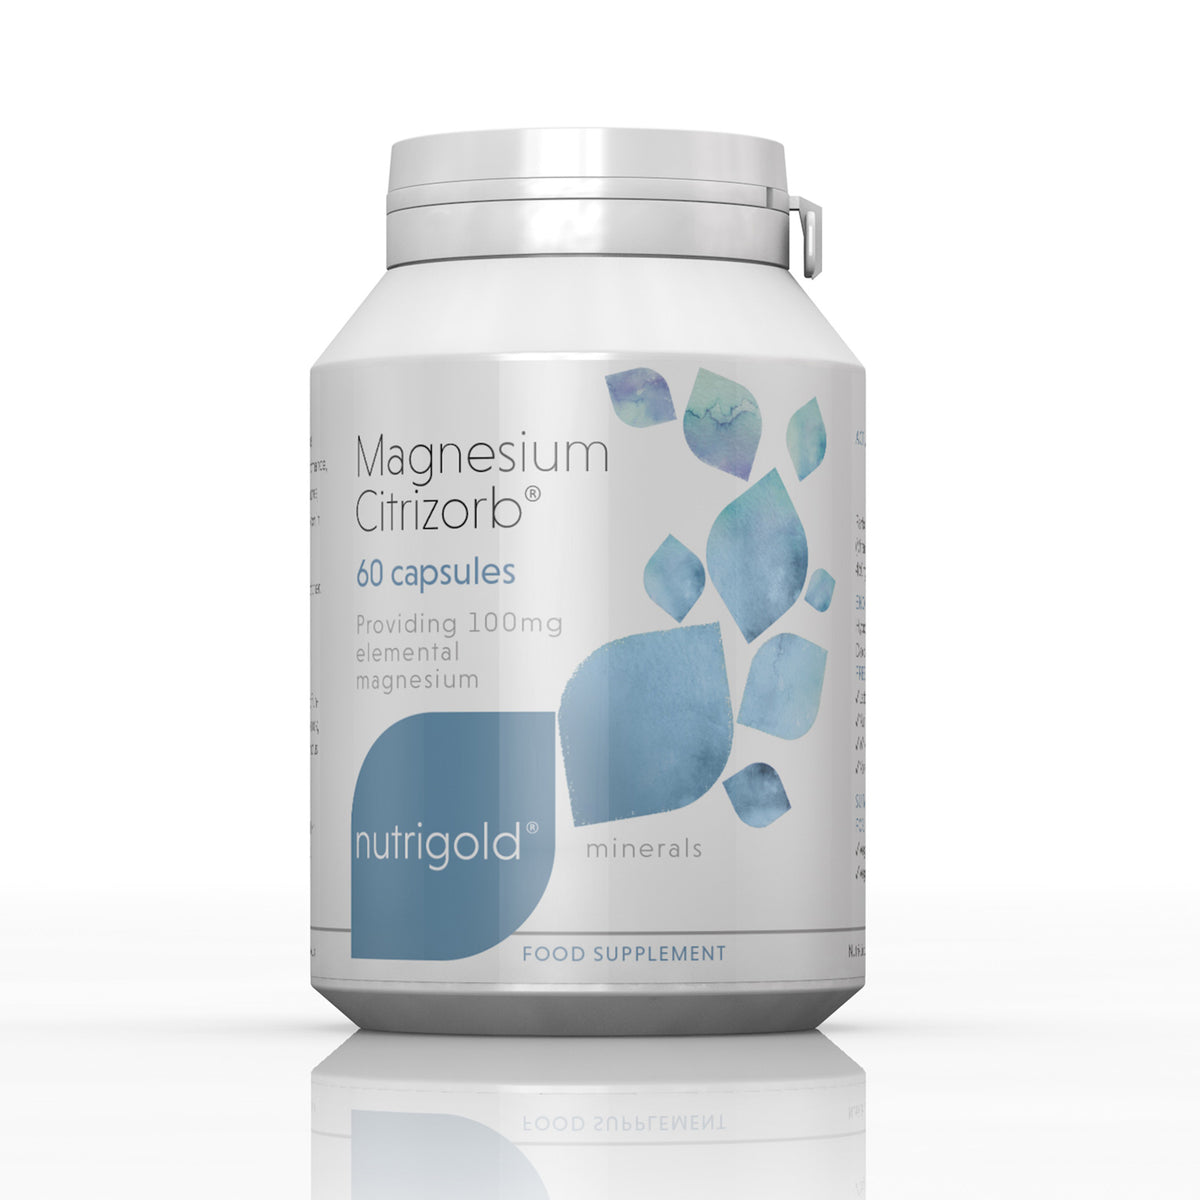 Magnesium Citrizorb Capsules | Nutrigold | Raw Living UK | Supplements | Vitamins &amp; Minerals | Nutrigold Magnesium Citrizorb provides 100mg elemental magnesium per capsule in a highly bioavailable &amp; bioactive organic citrate form. Supports a healthy body.